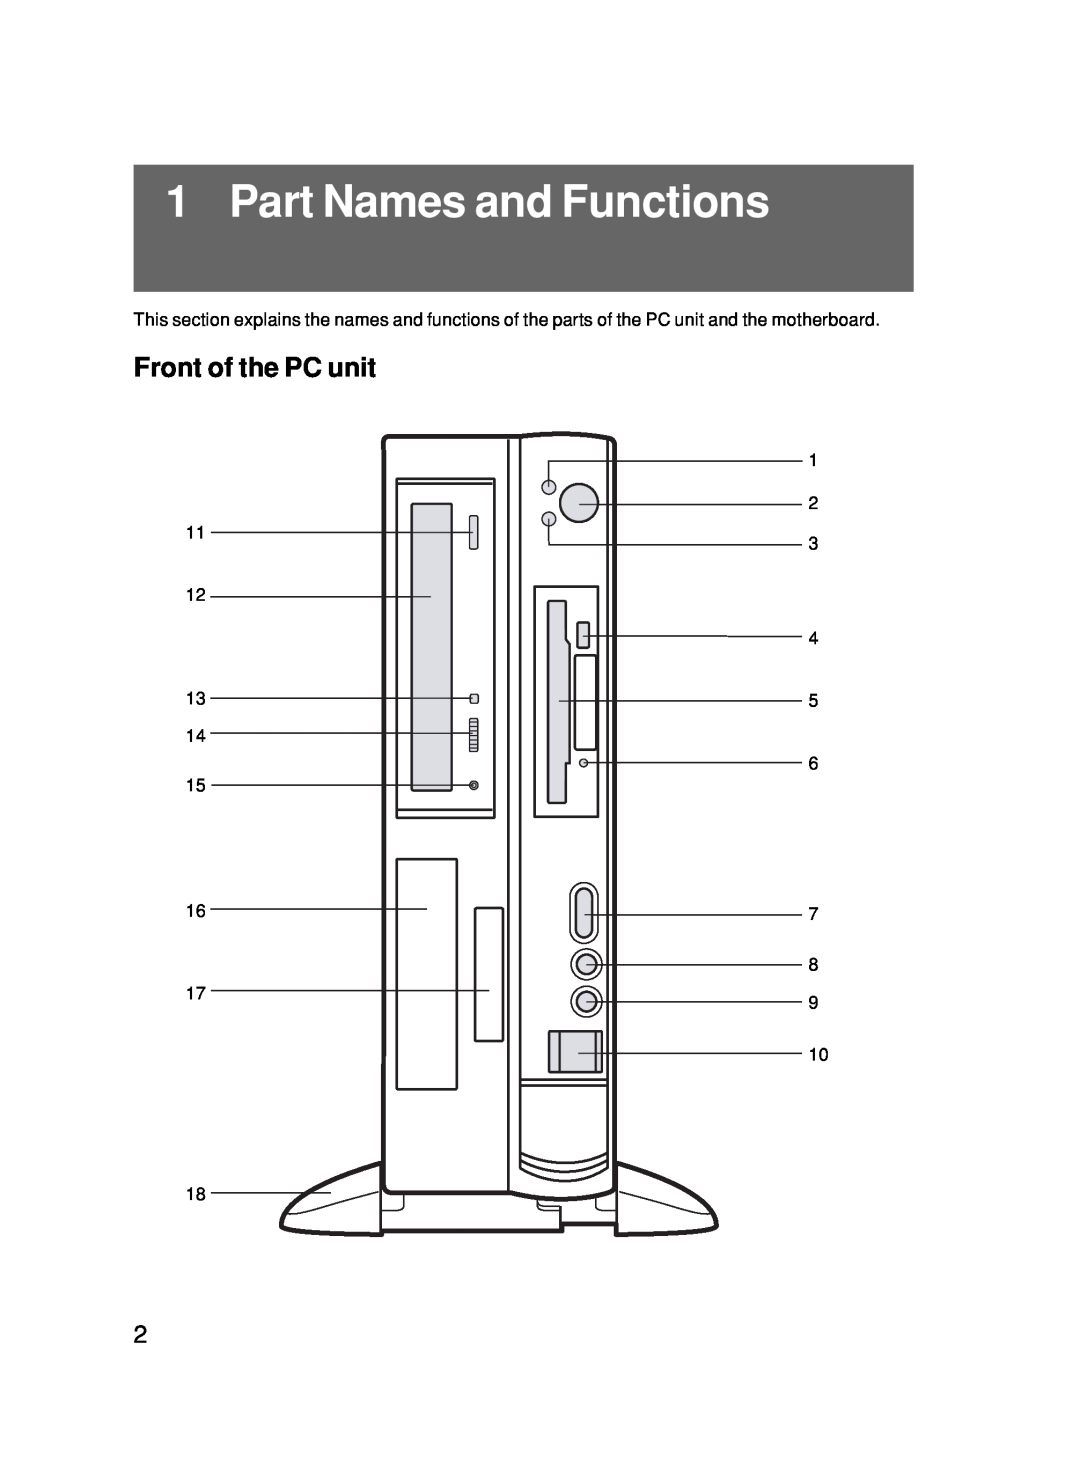 Fujitsu 500 user manual Part Names and Functions, Front of the PC unit 